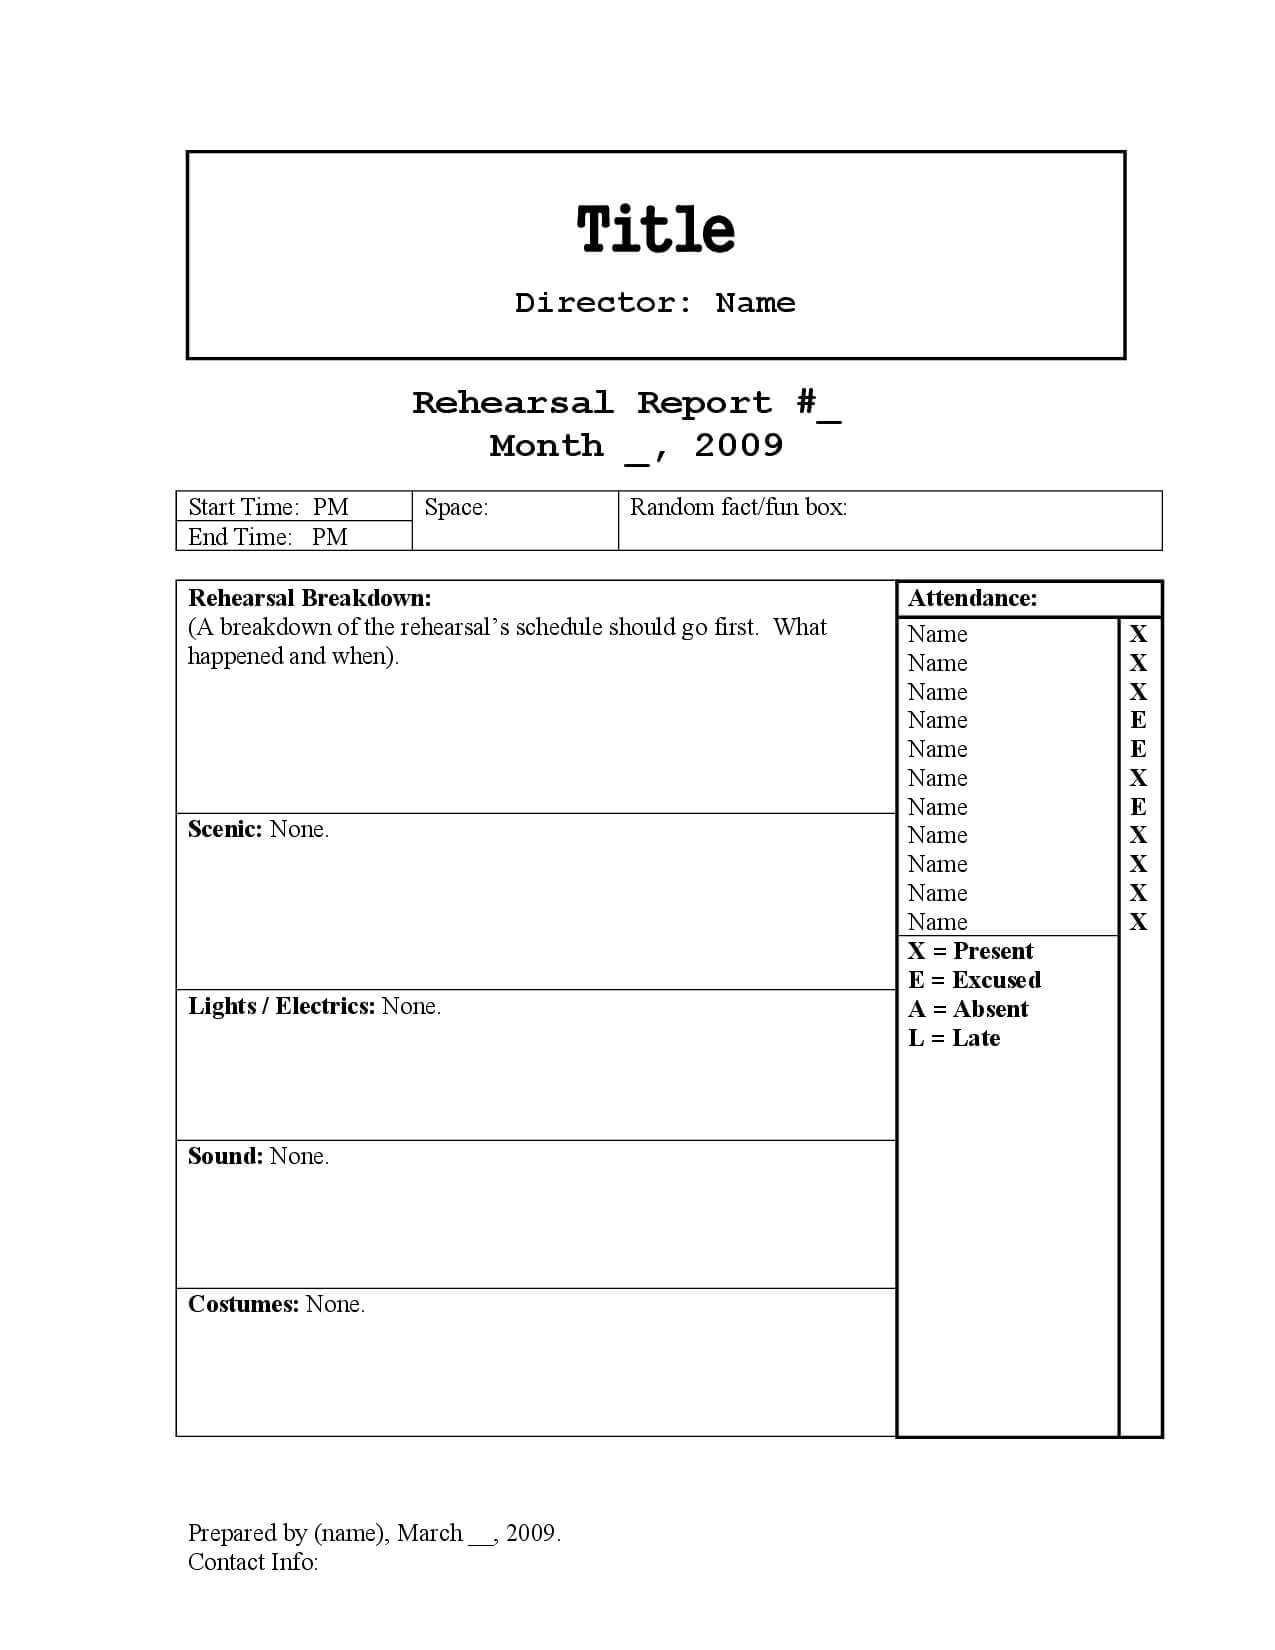 Rehearsal Report Template | Stage Manager In 2019 | Project Within Sound Report Template